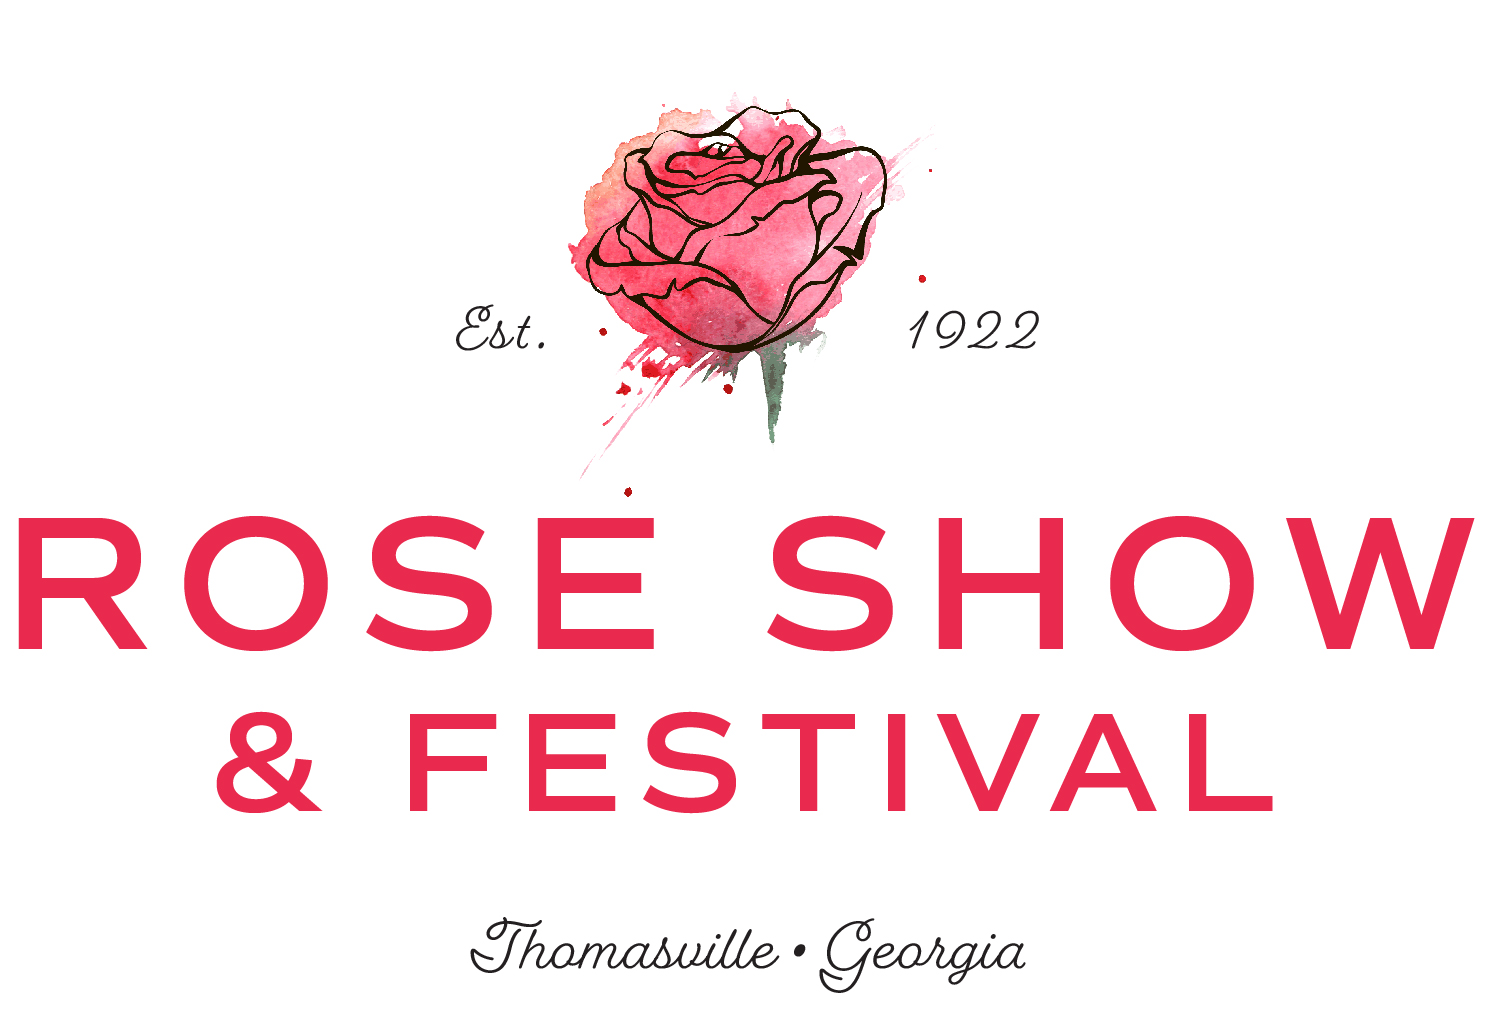 Thomasville's 98th Annual Rose Show & Festival, The City of Thomasville